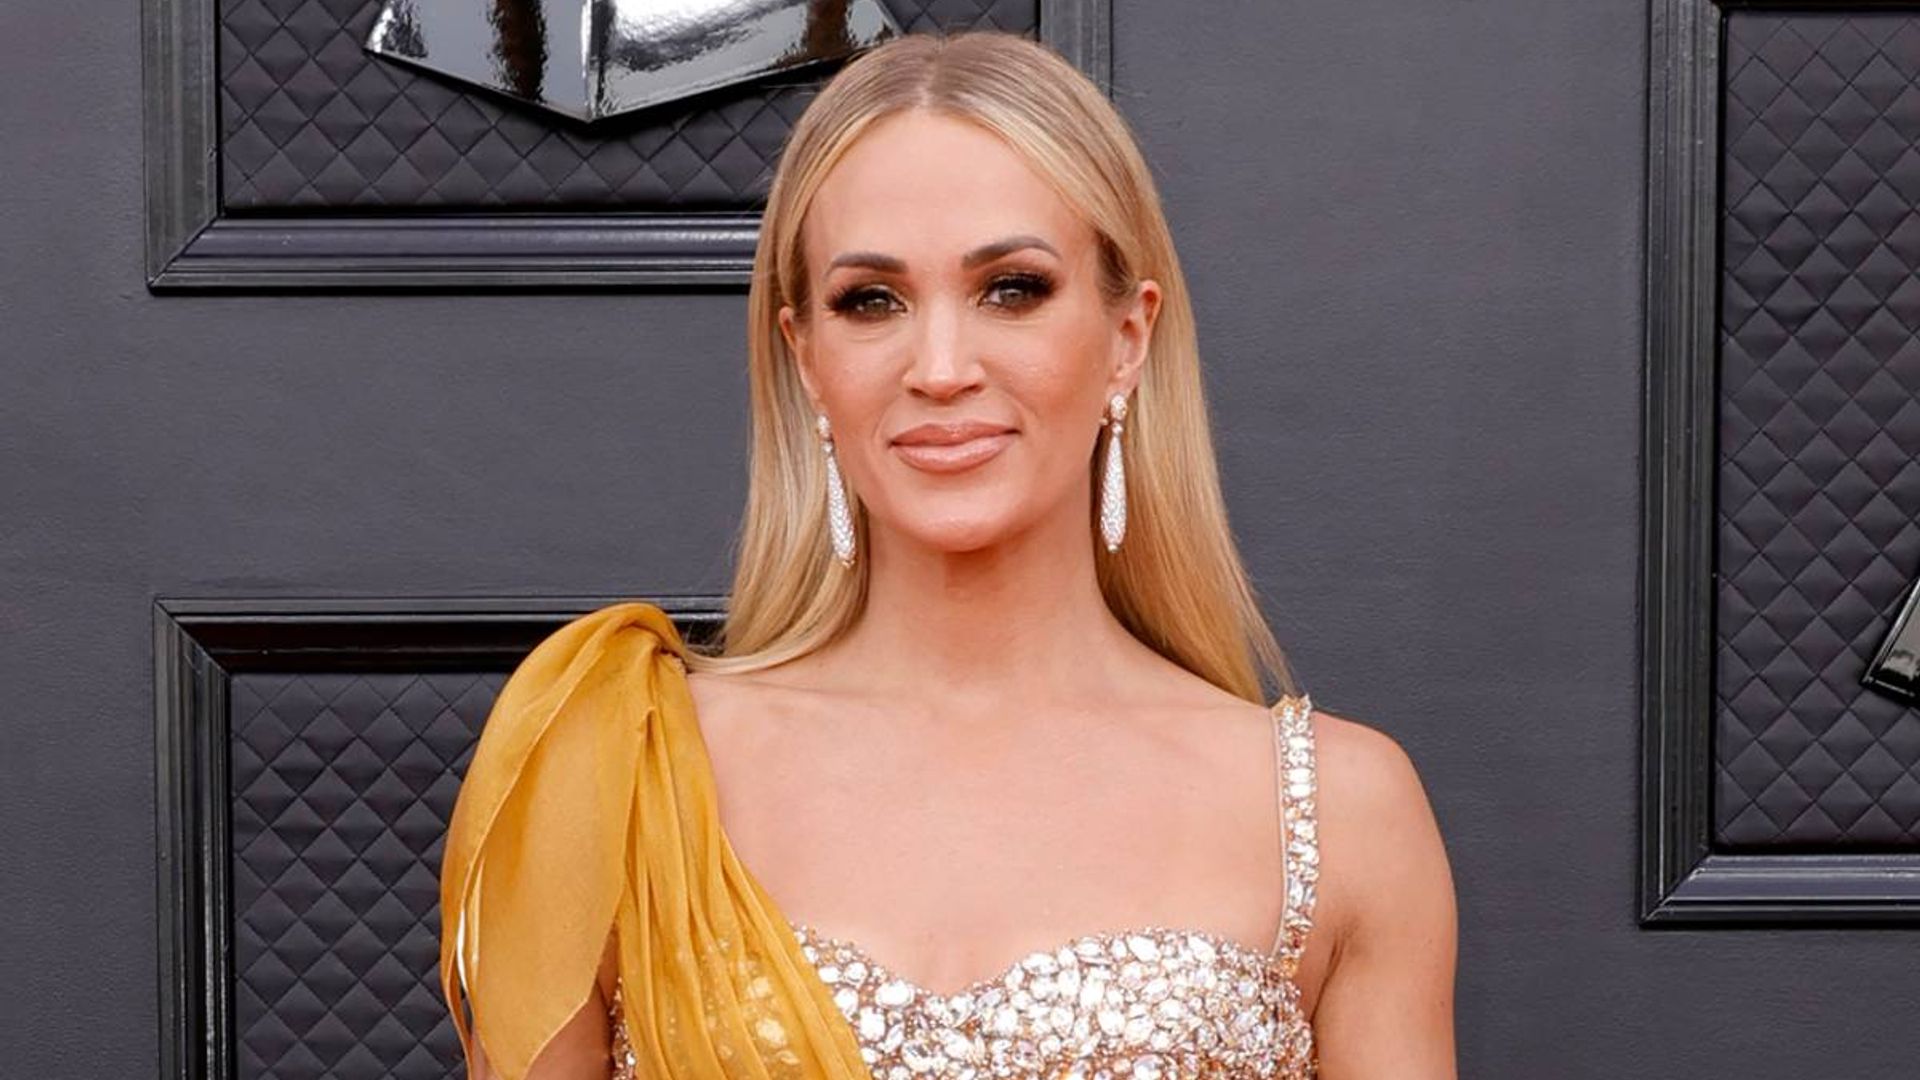 Carrie Underwood prepares to leave sons, husband as major change to family  dynamic approaches